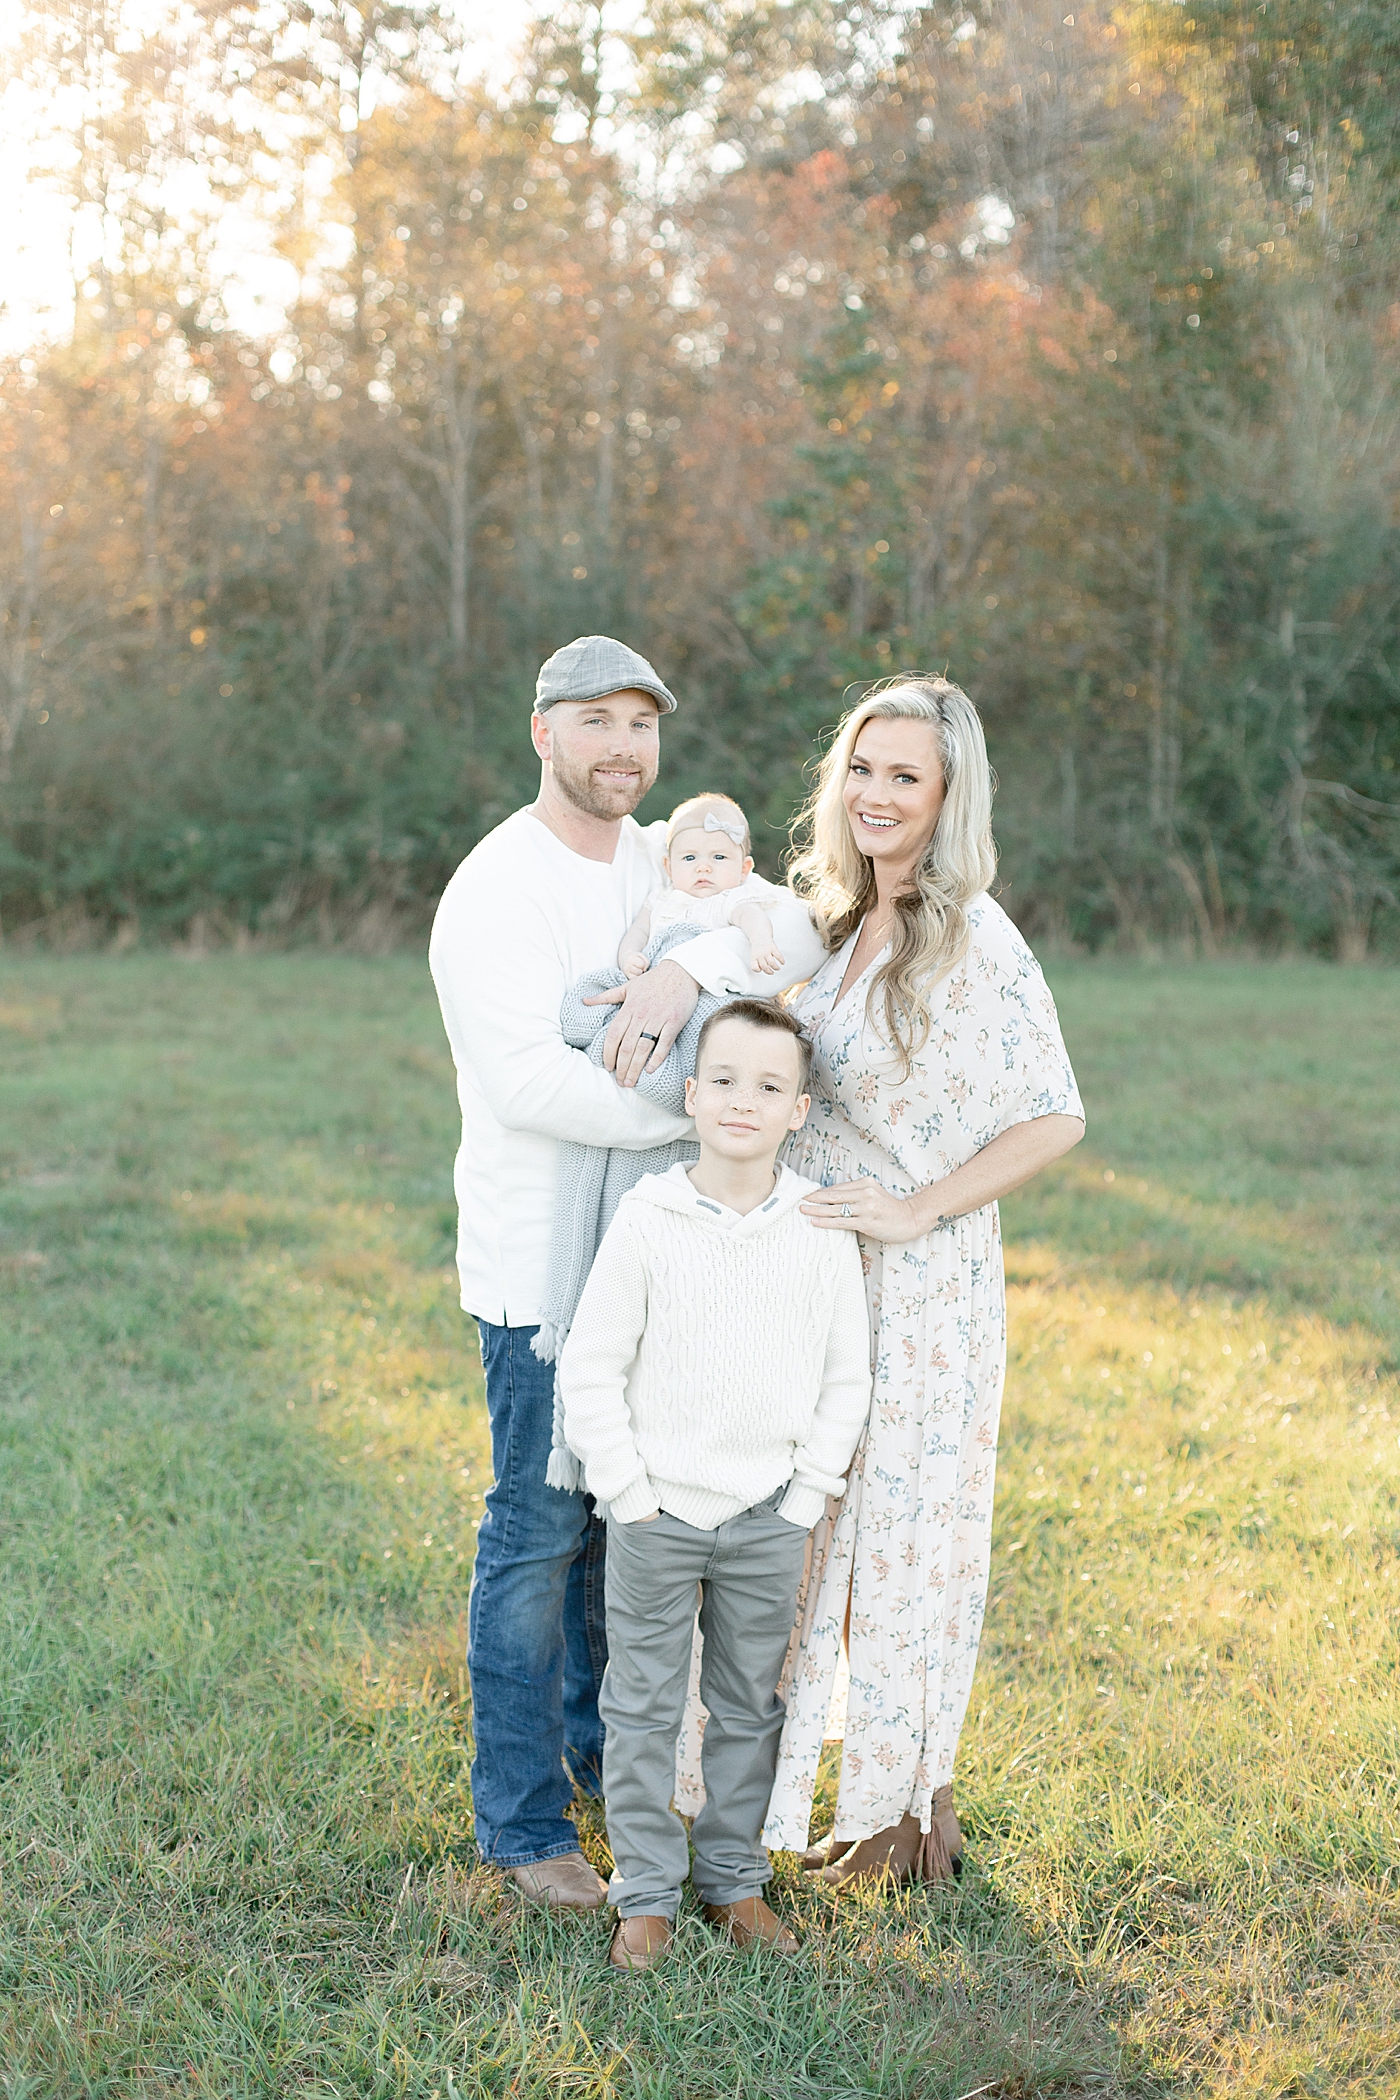 Family smiling together in a field | Photo by Gulfport baby photographer Little Sunshine Photography